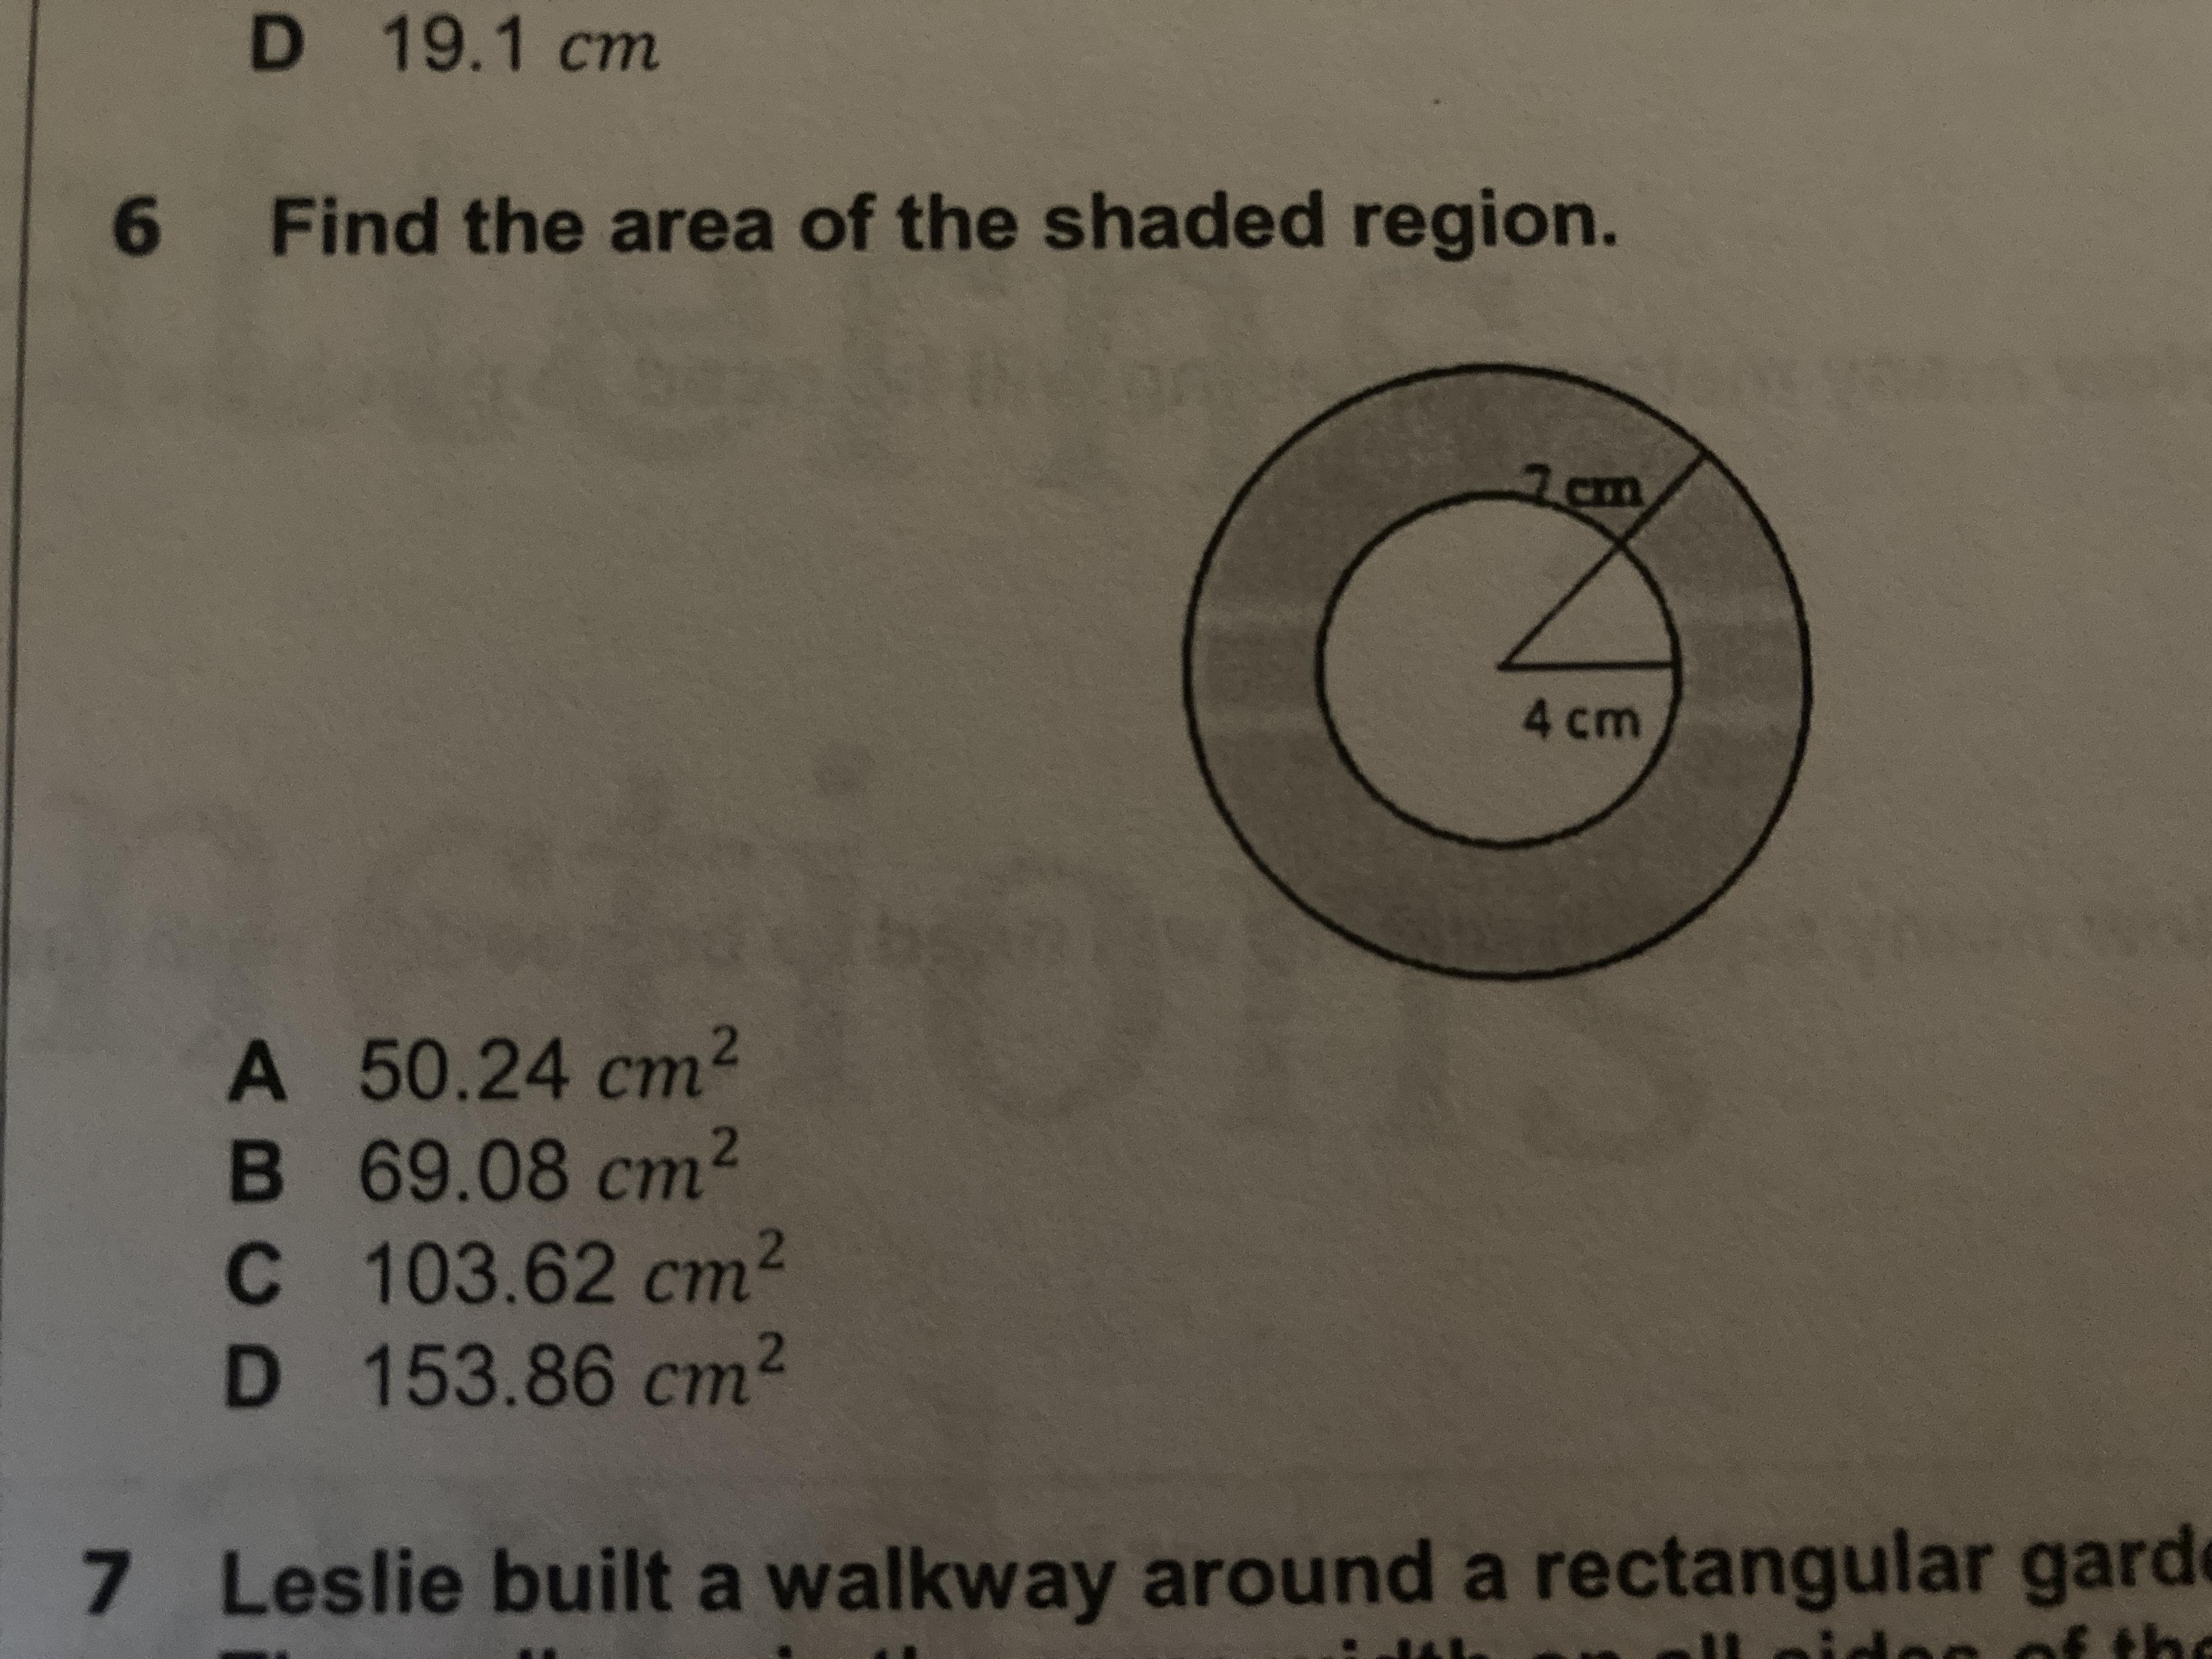 Find The Area Of The Shaded Region.